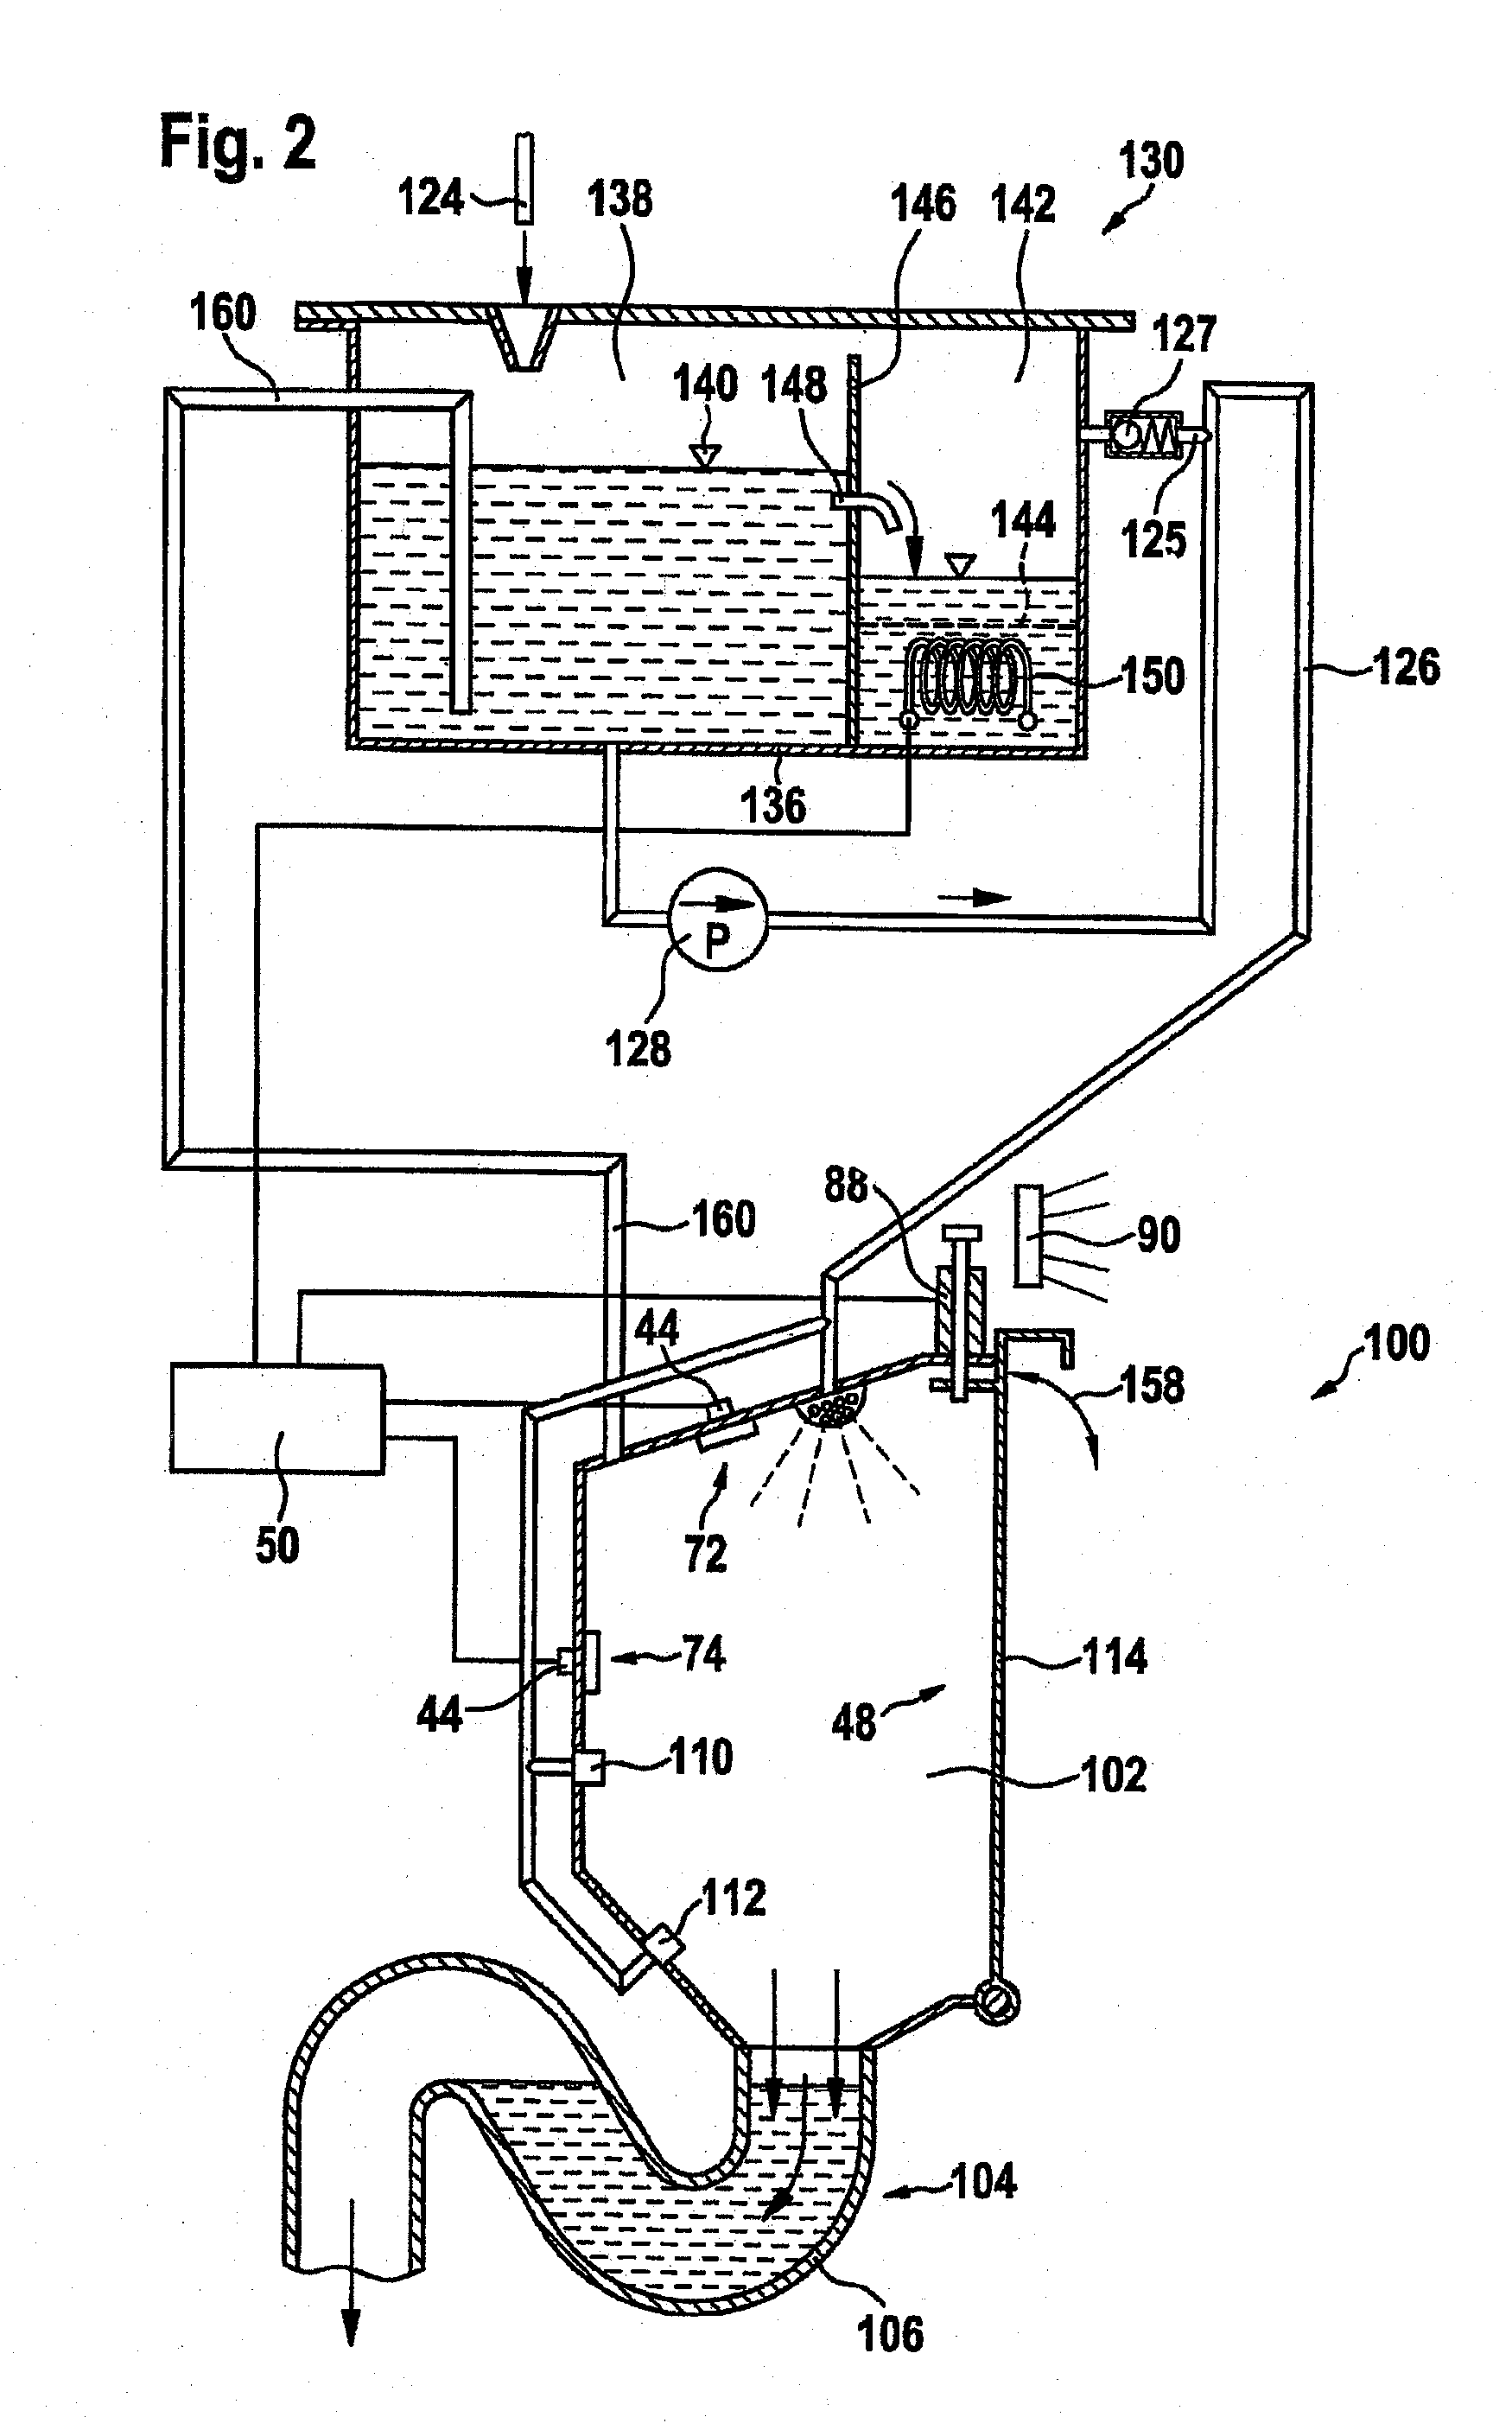 Method for assessing and guaranteeing a thermal hygiene effect